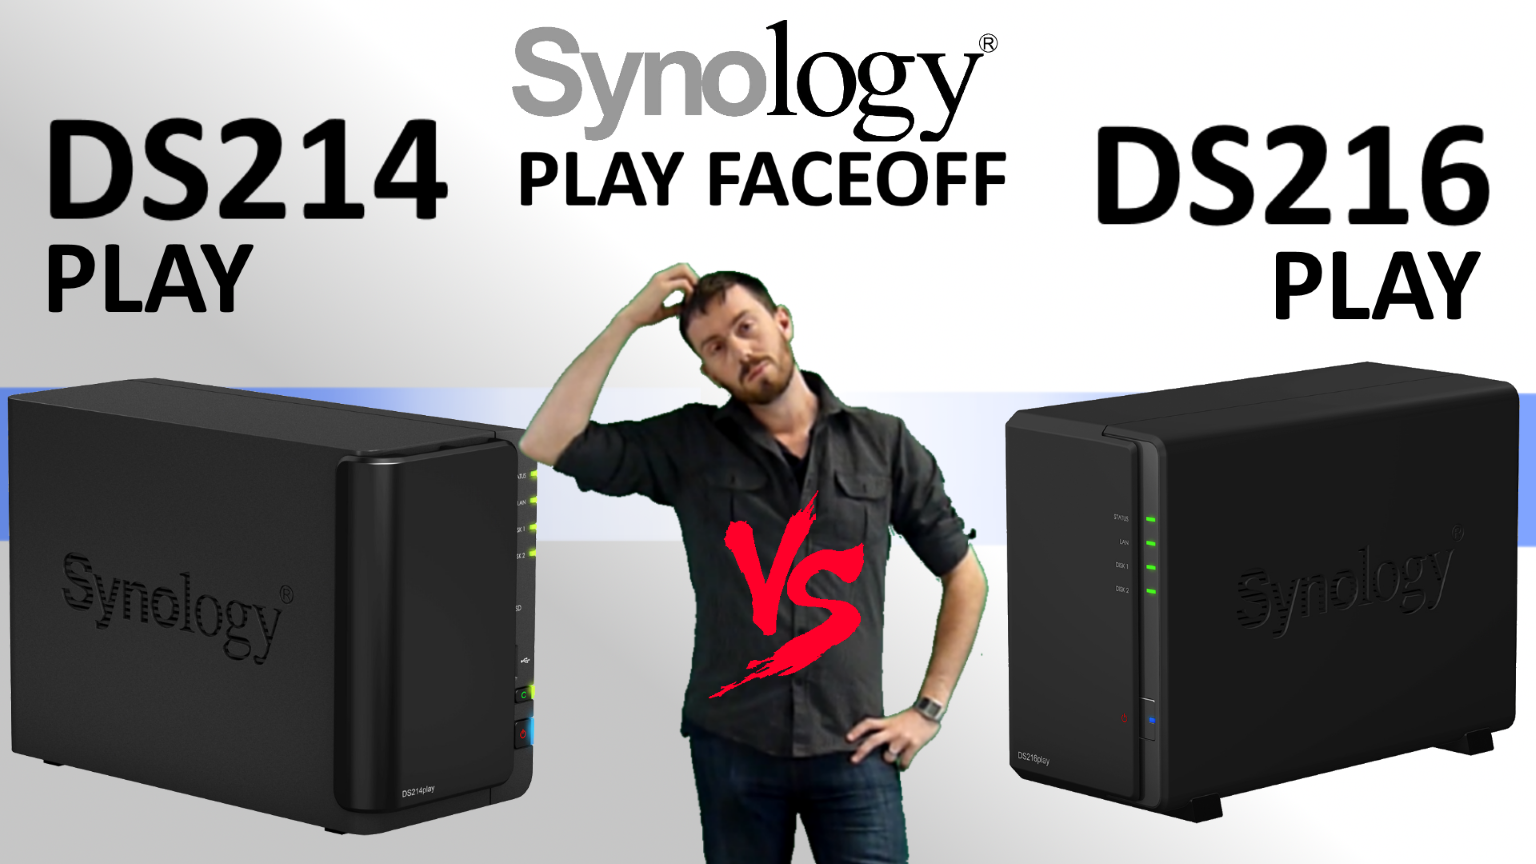 The Synology DS216play vs DS214play – Which NAS should you PLAY with in 2016?